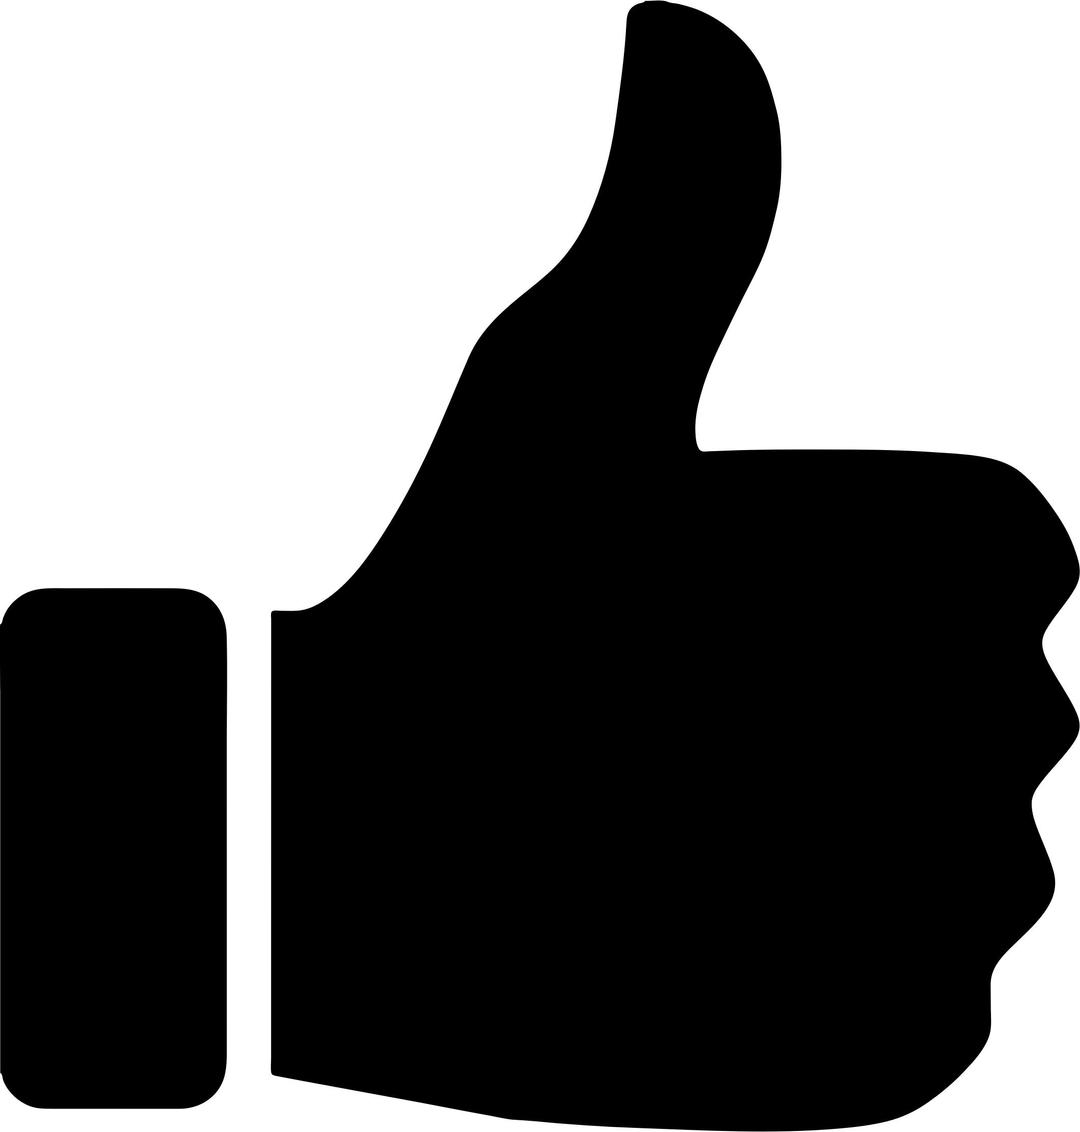 Thumbs Up Silhouette png transparent